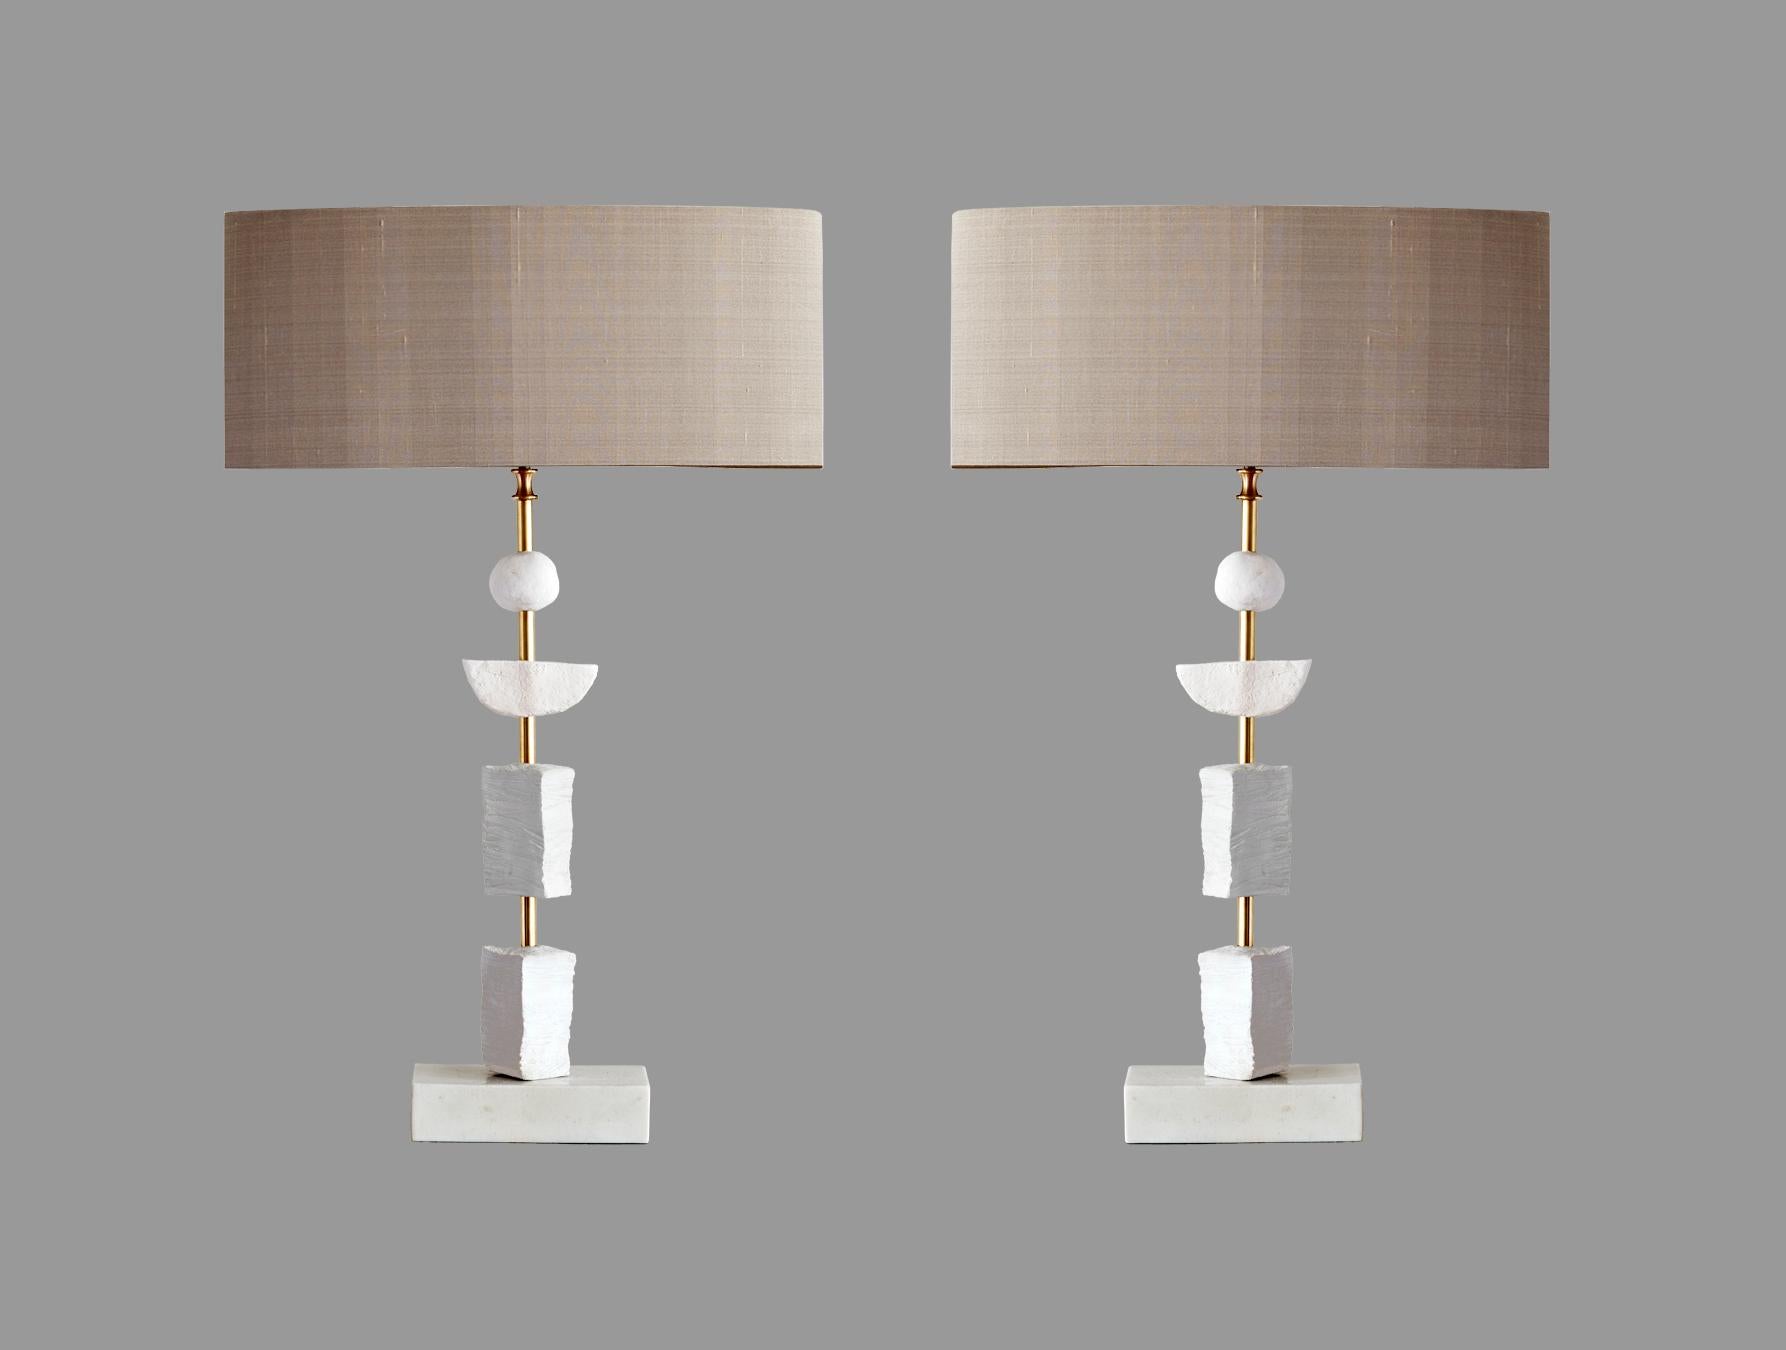 English Pair of Contemporary European Table Lamp Synergy in White by Margit Wittig